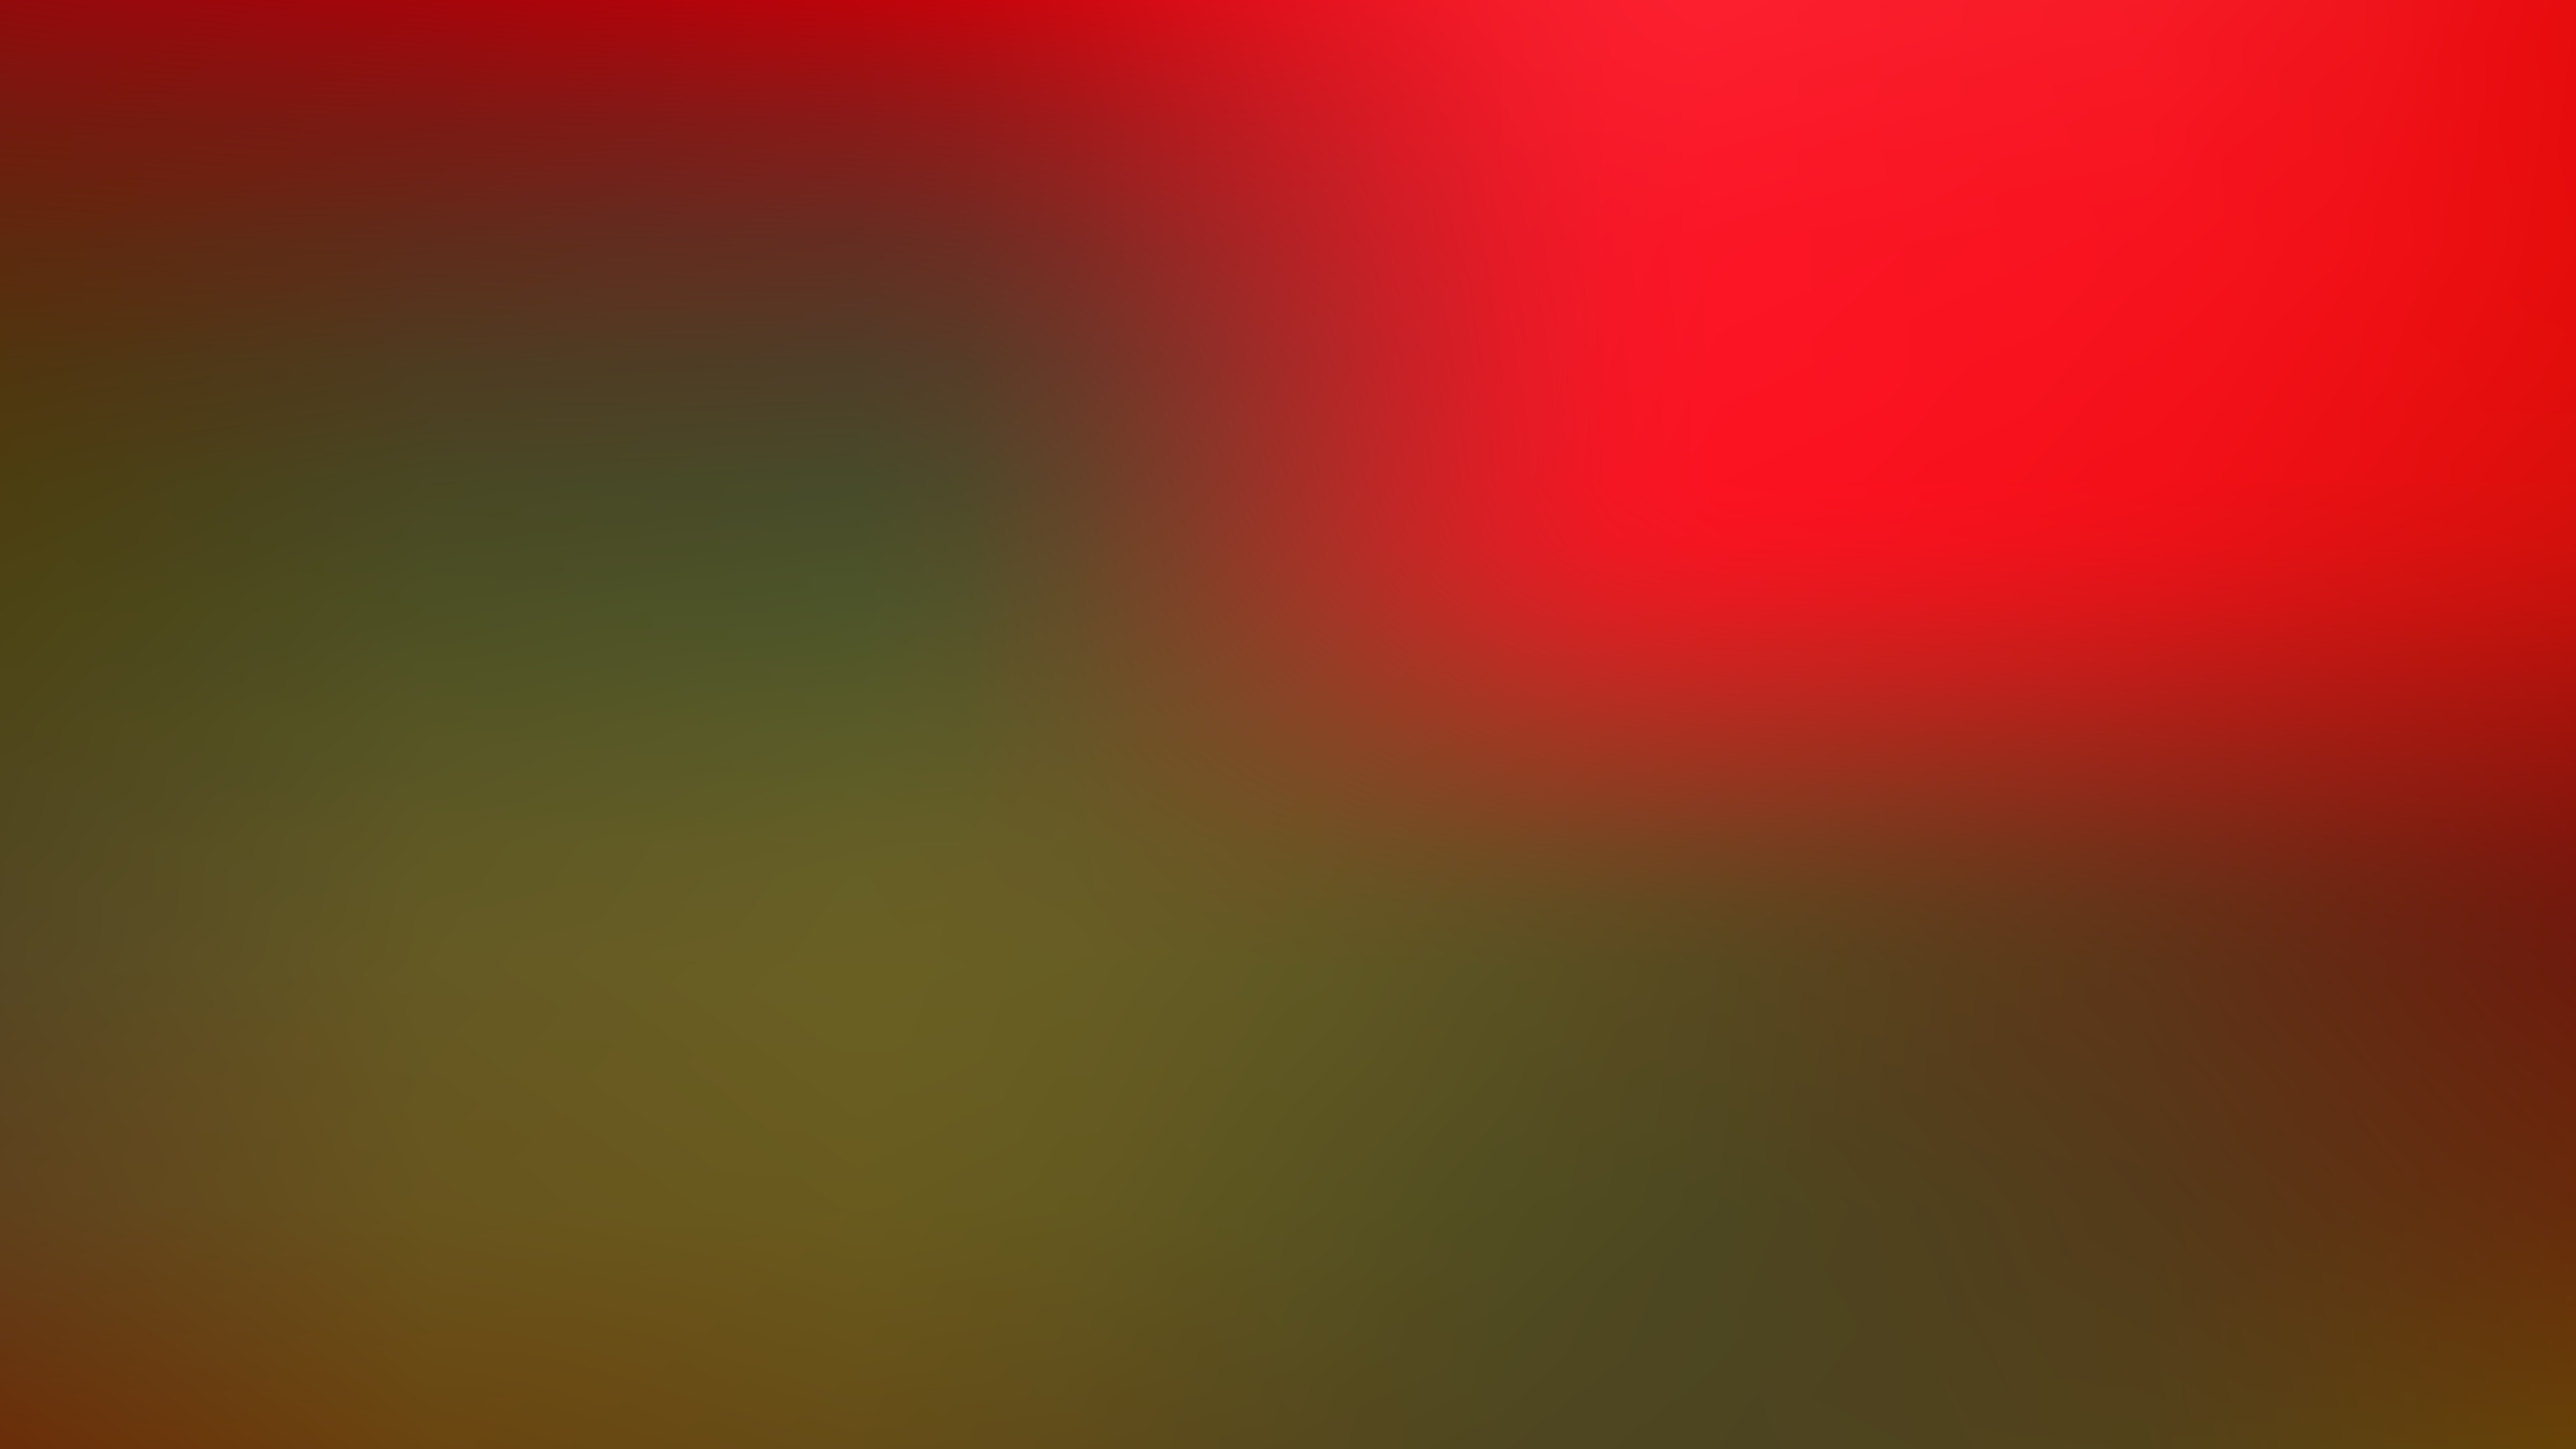 Free Red and Green Blur Background Vector